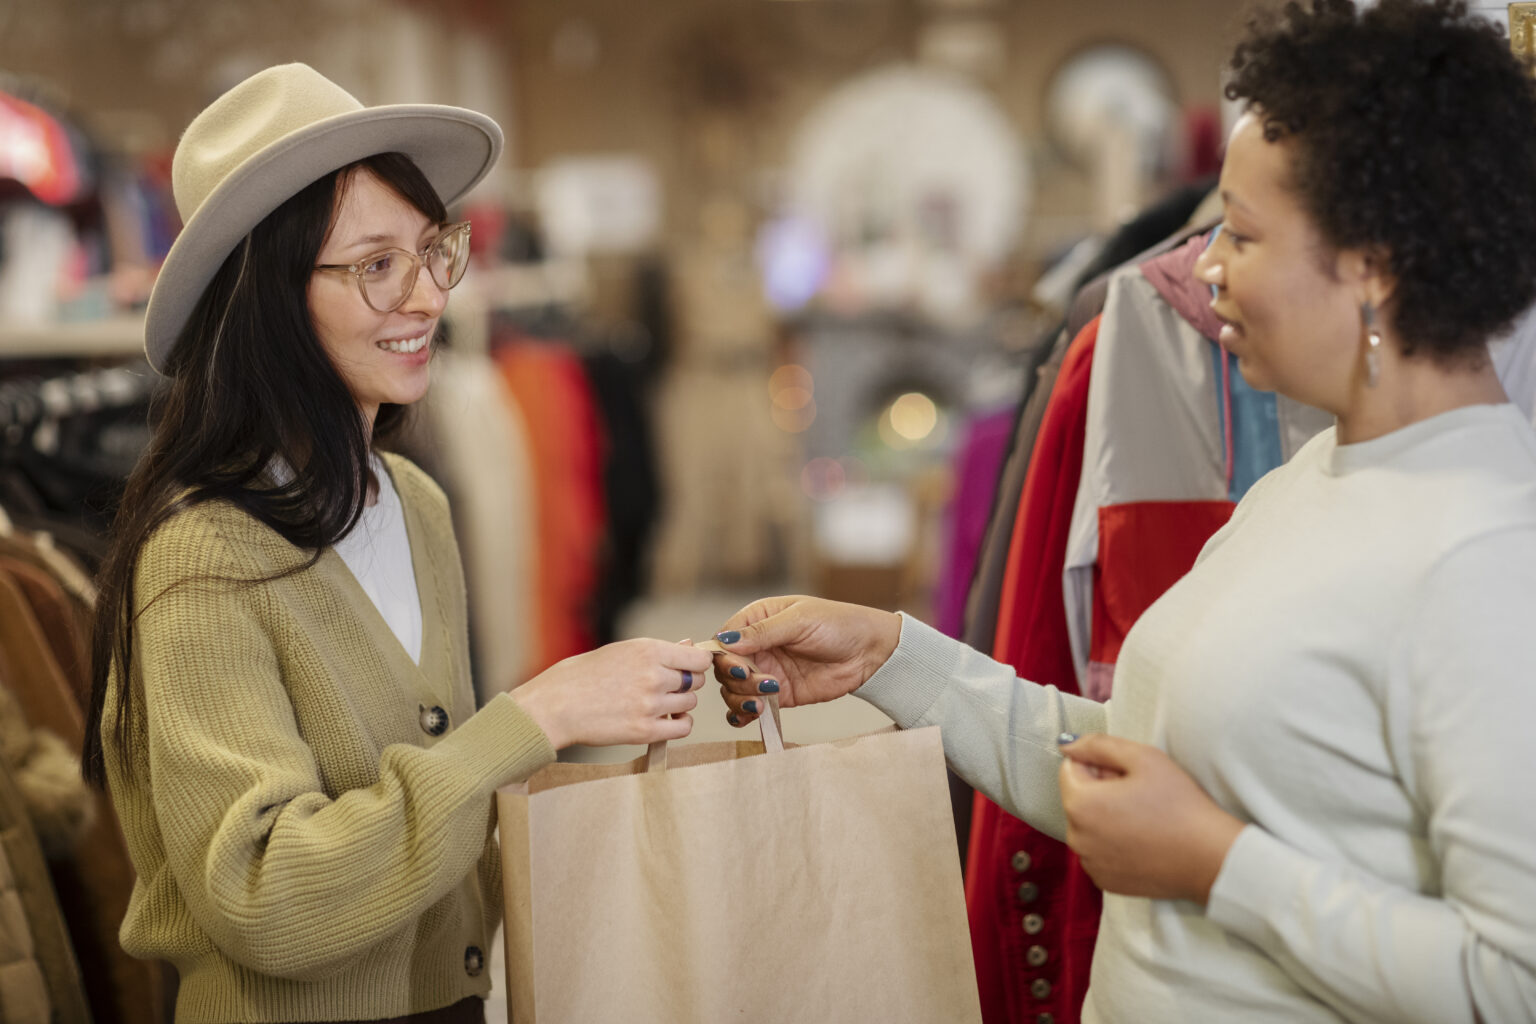 Ahead of the curve: Adapt these retail trends to stay relevant in the ever-evolving marketplace